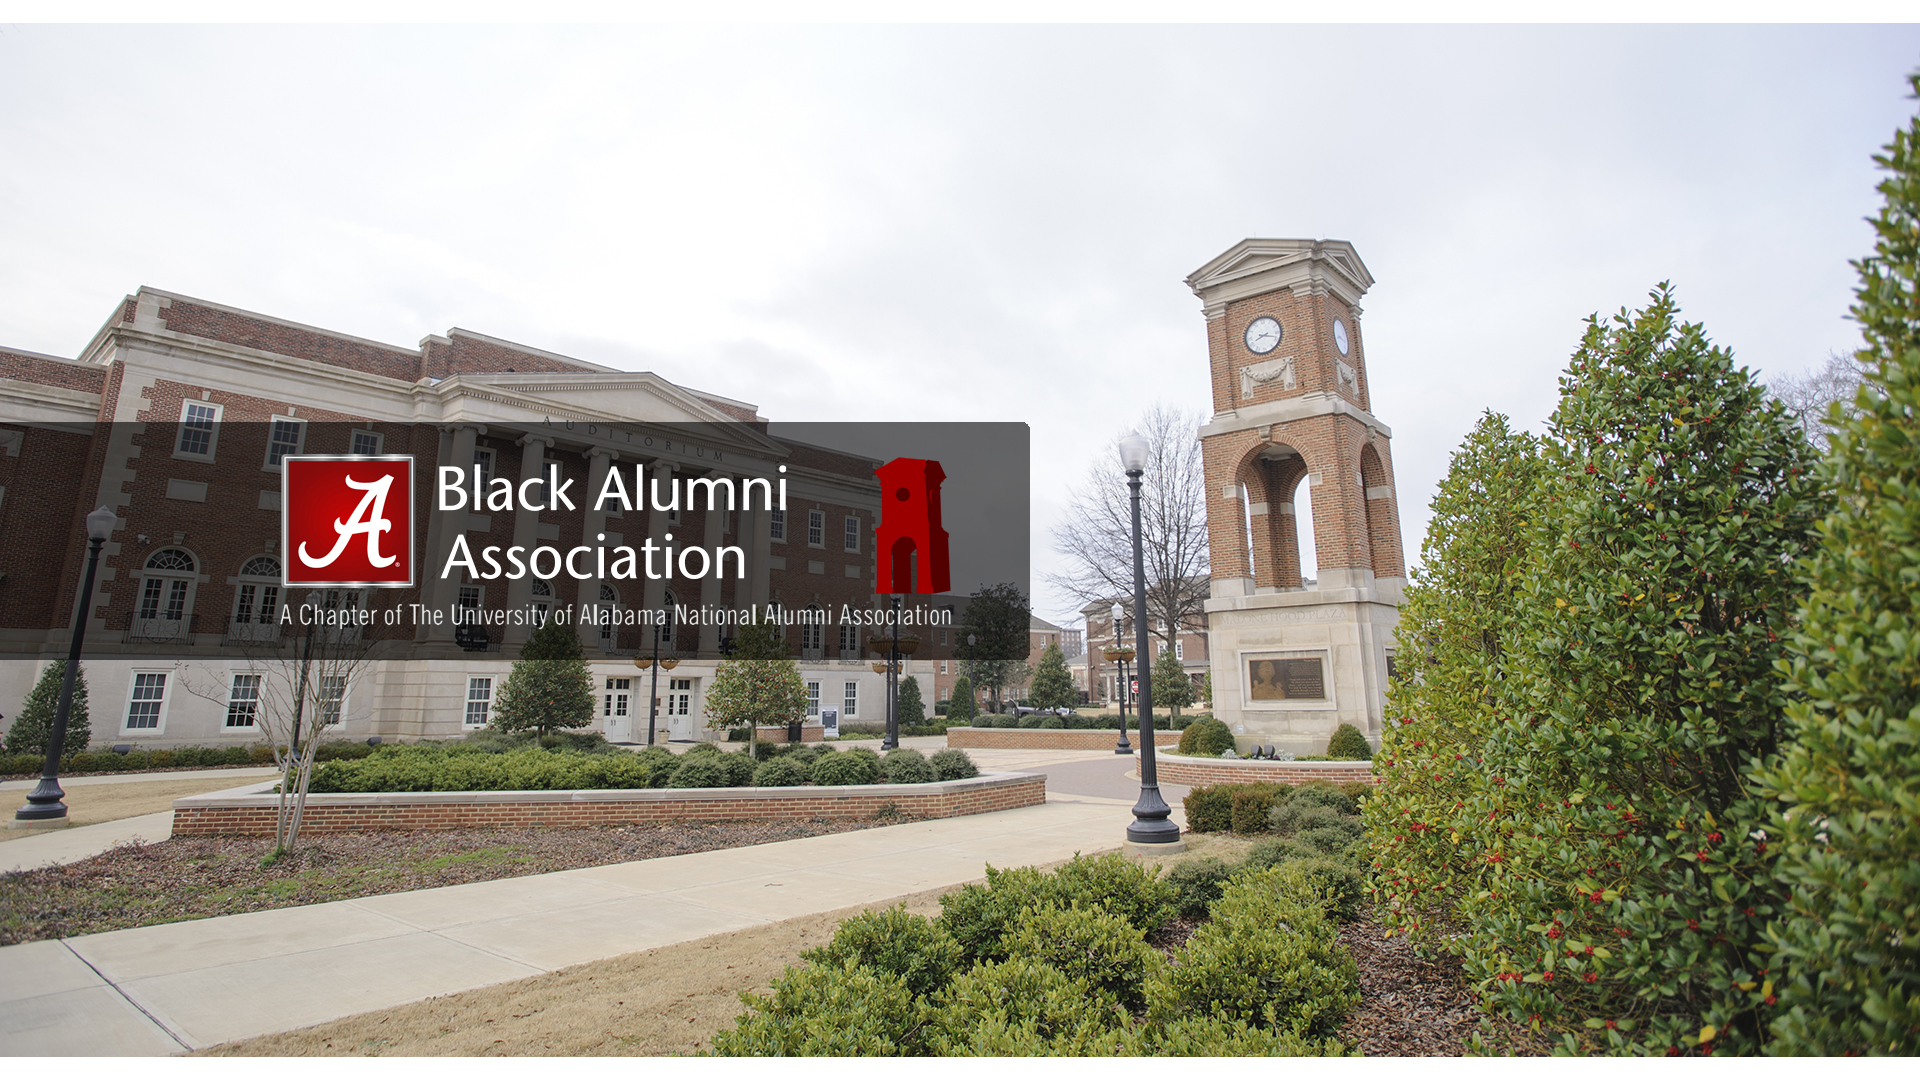 Black Alumni Association over a photo of Fosters Auditorium and Malone Hood Plaza